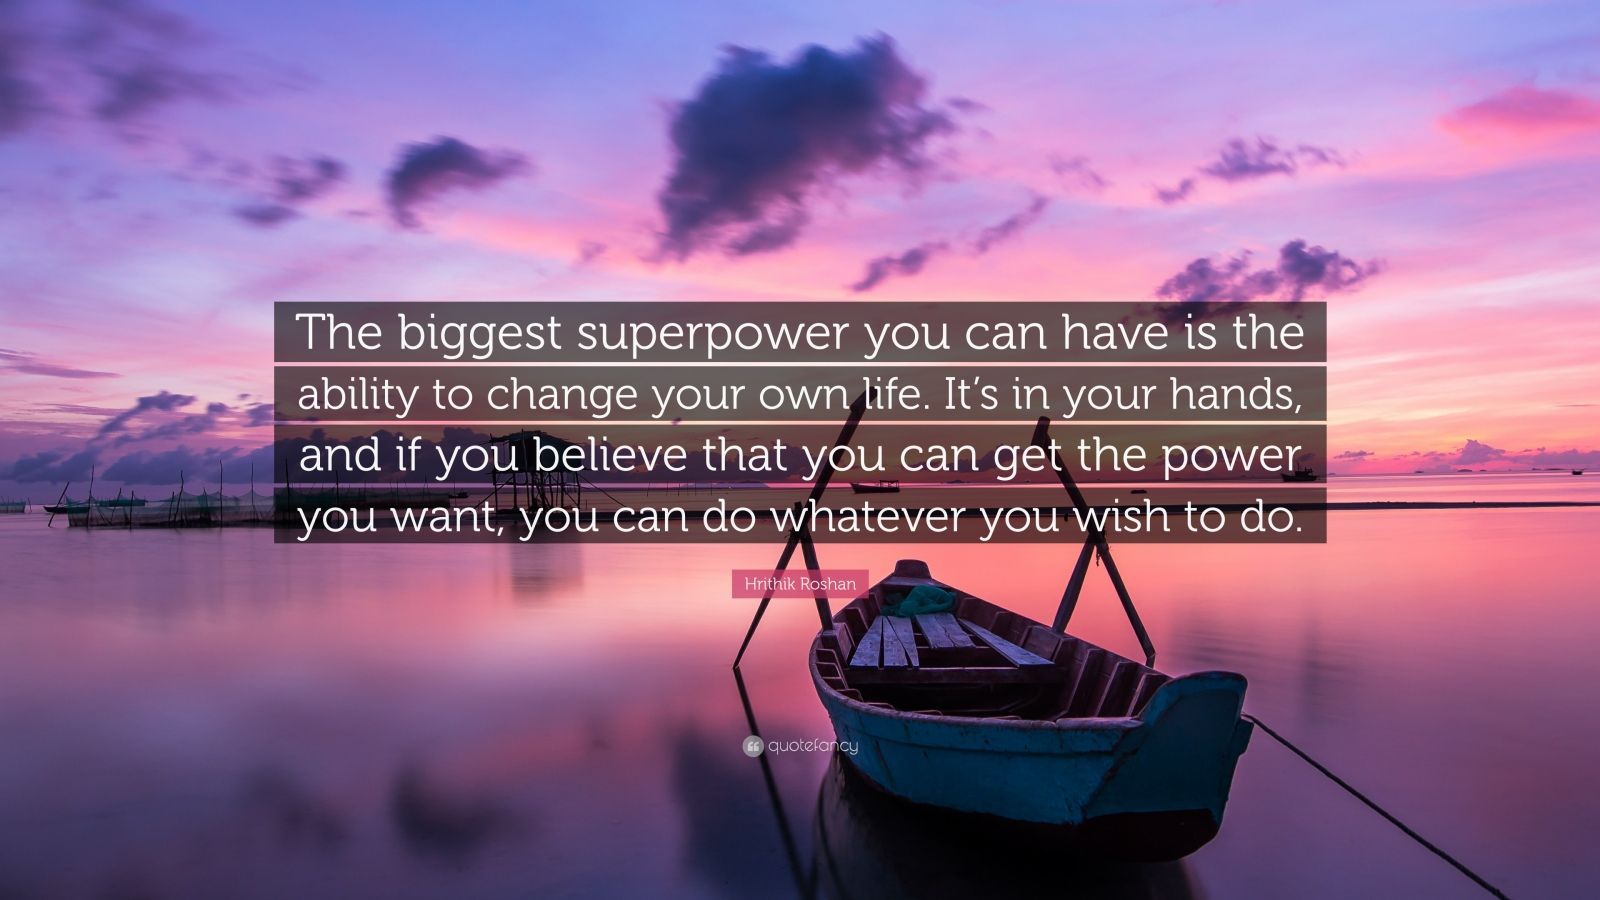 Hrithik Roshan Quote: “The biggest superpower you can have is